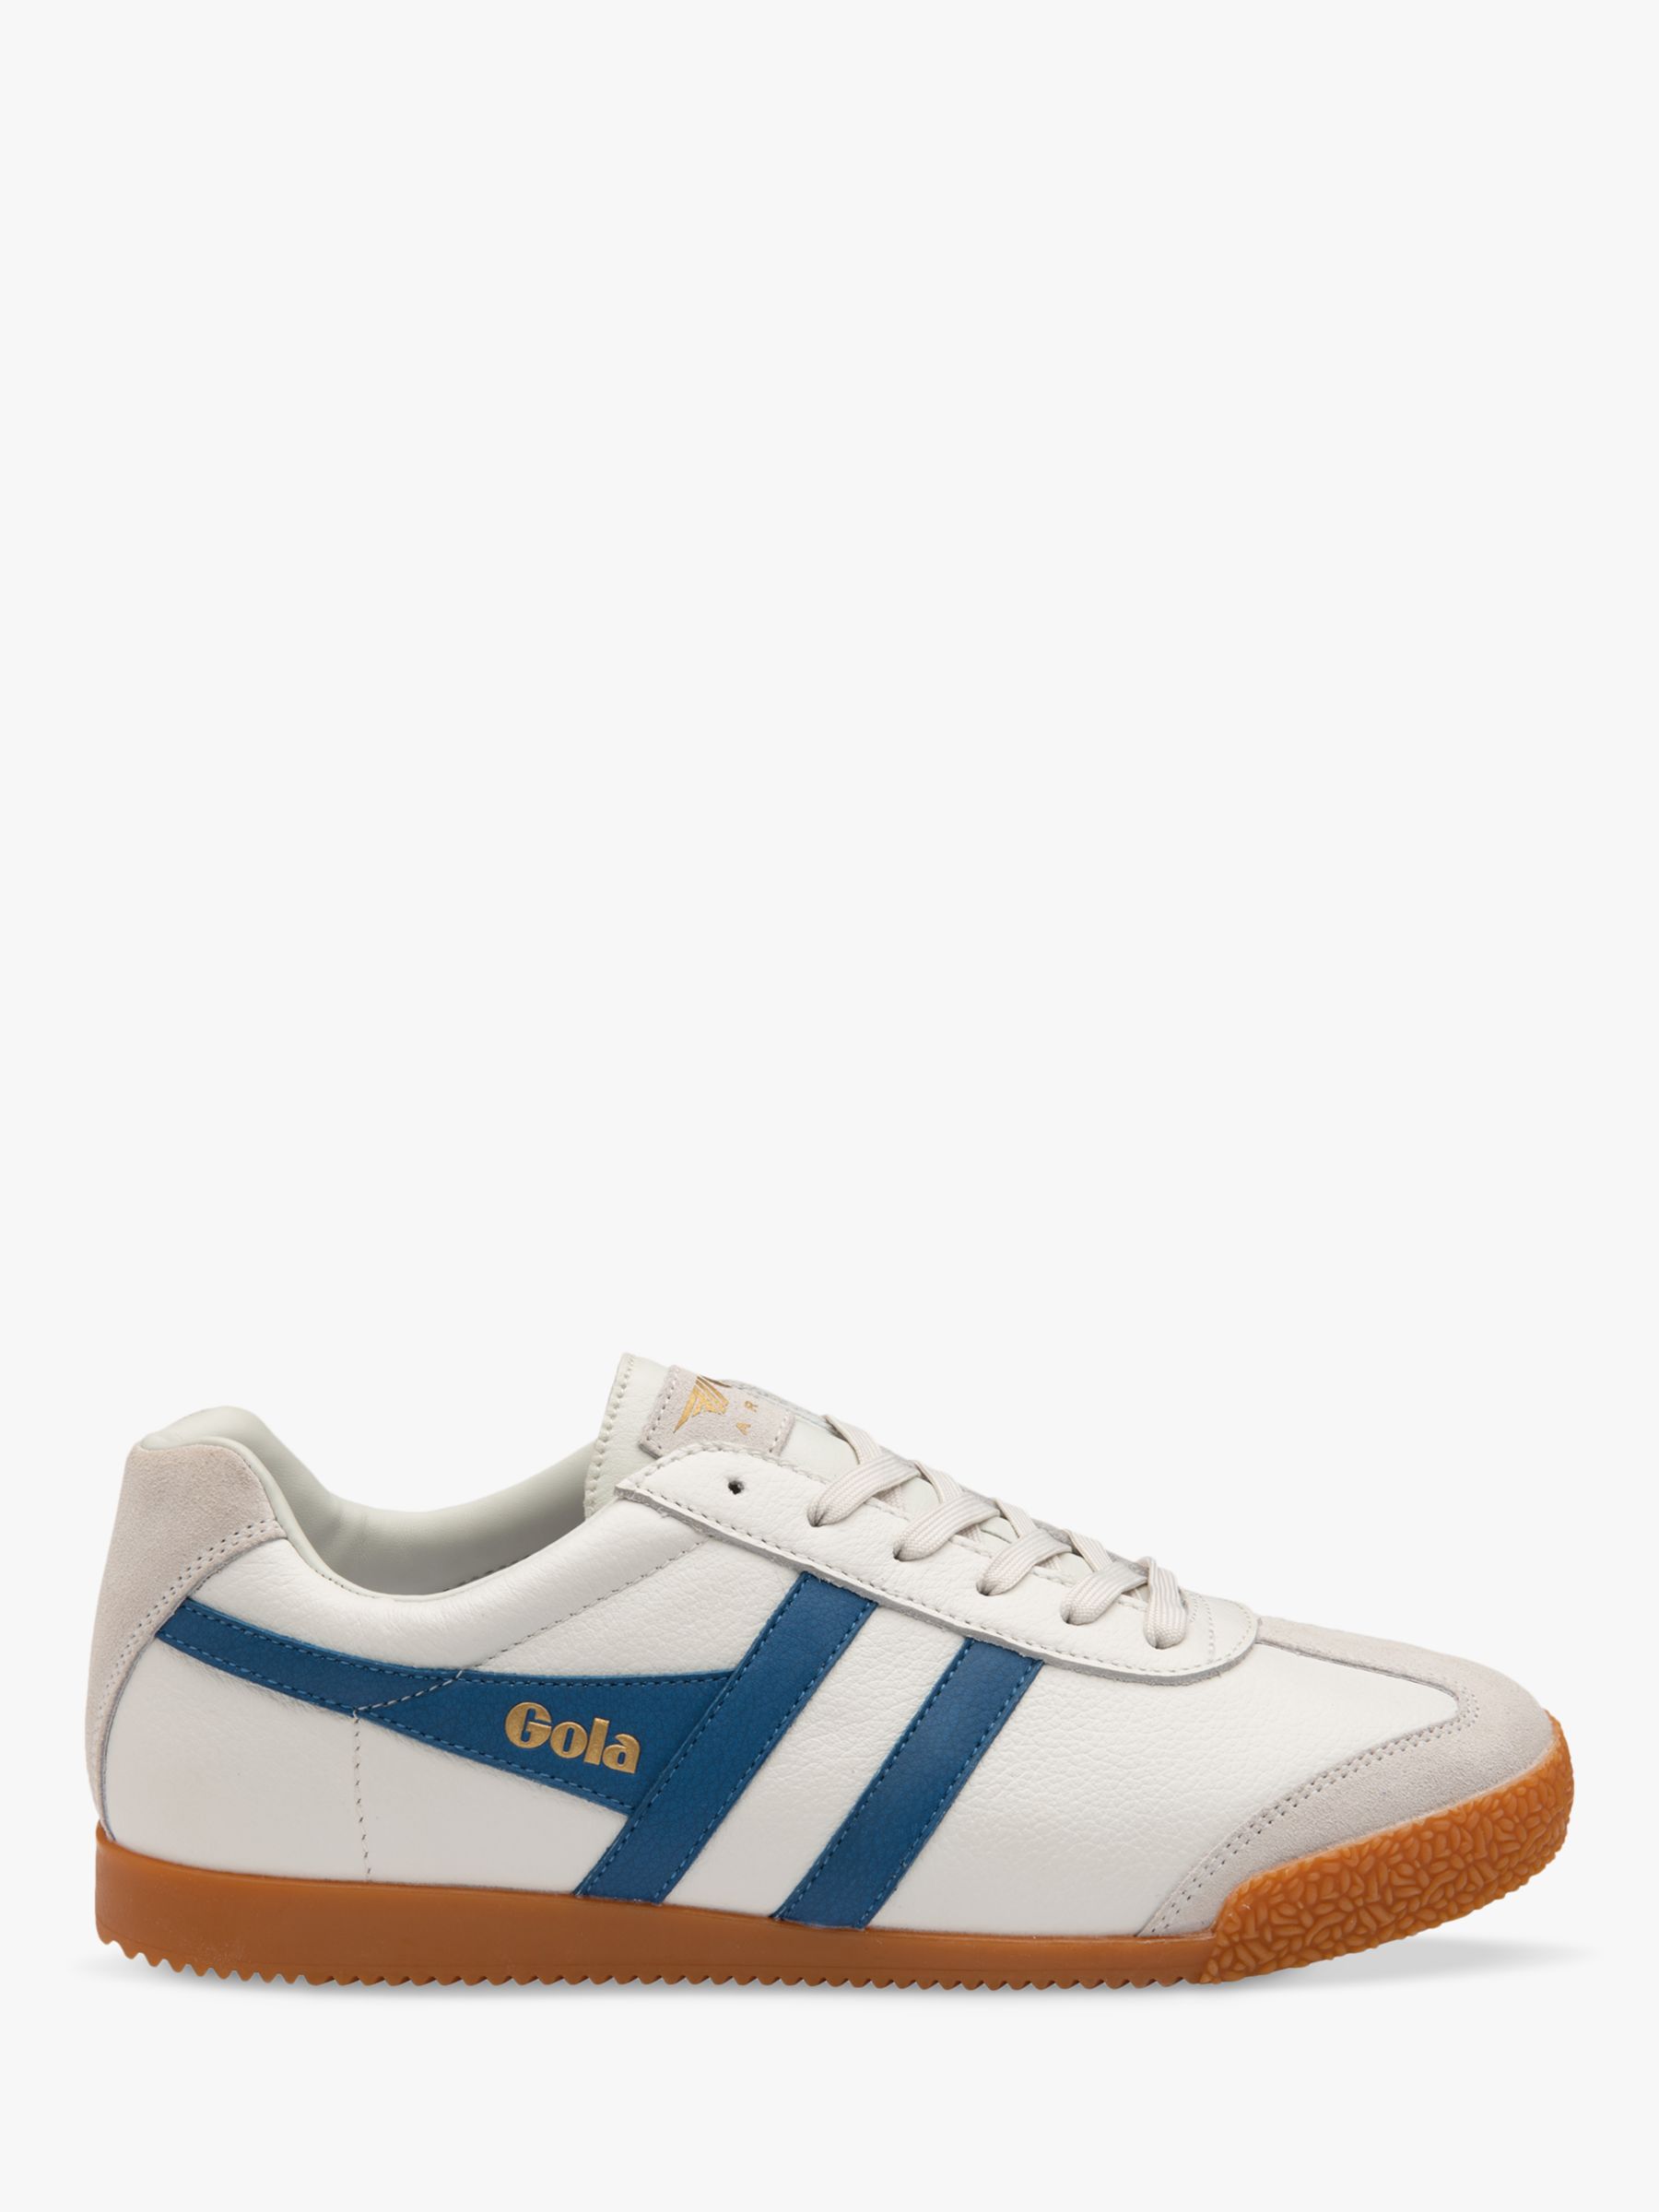 Gola Classics Harrier Leather Lace Up Trainers, White/Marine Blue, 6